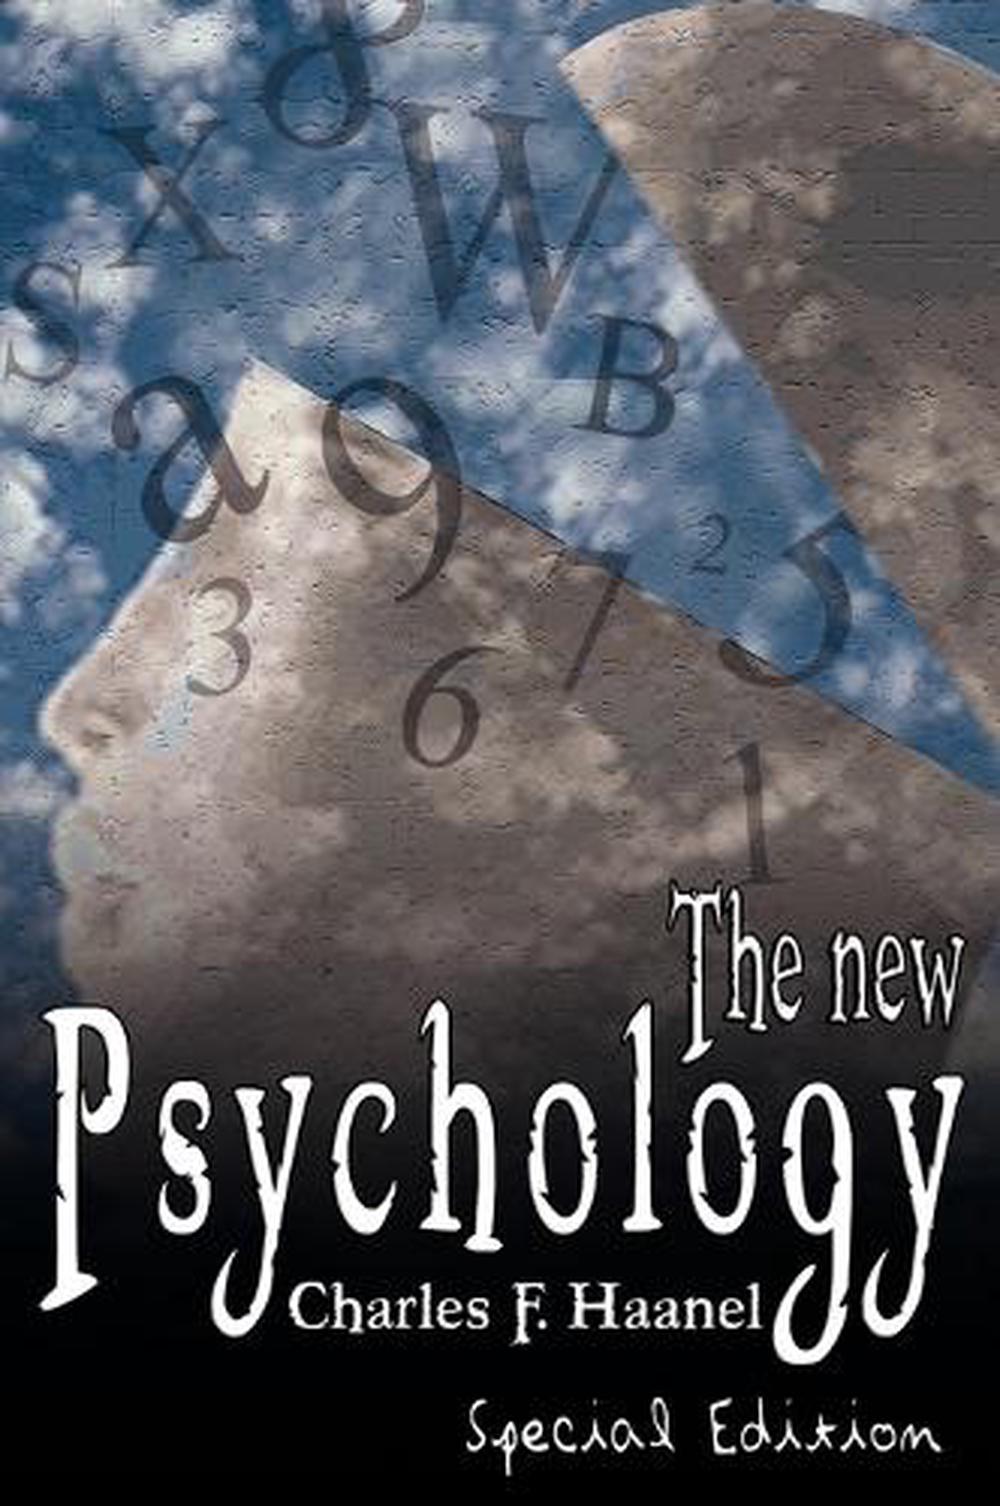 The New Psychology by Charles F. Haanel (English) Hardcover Book Free ...